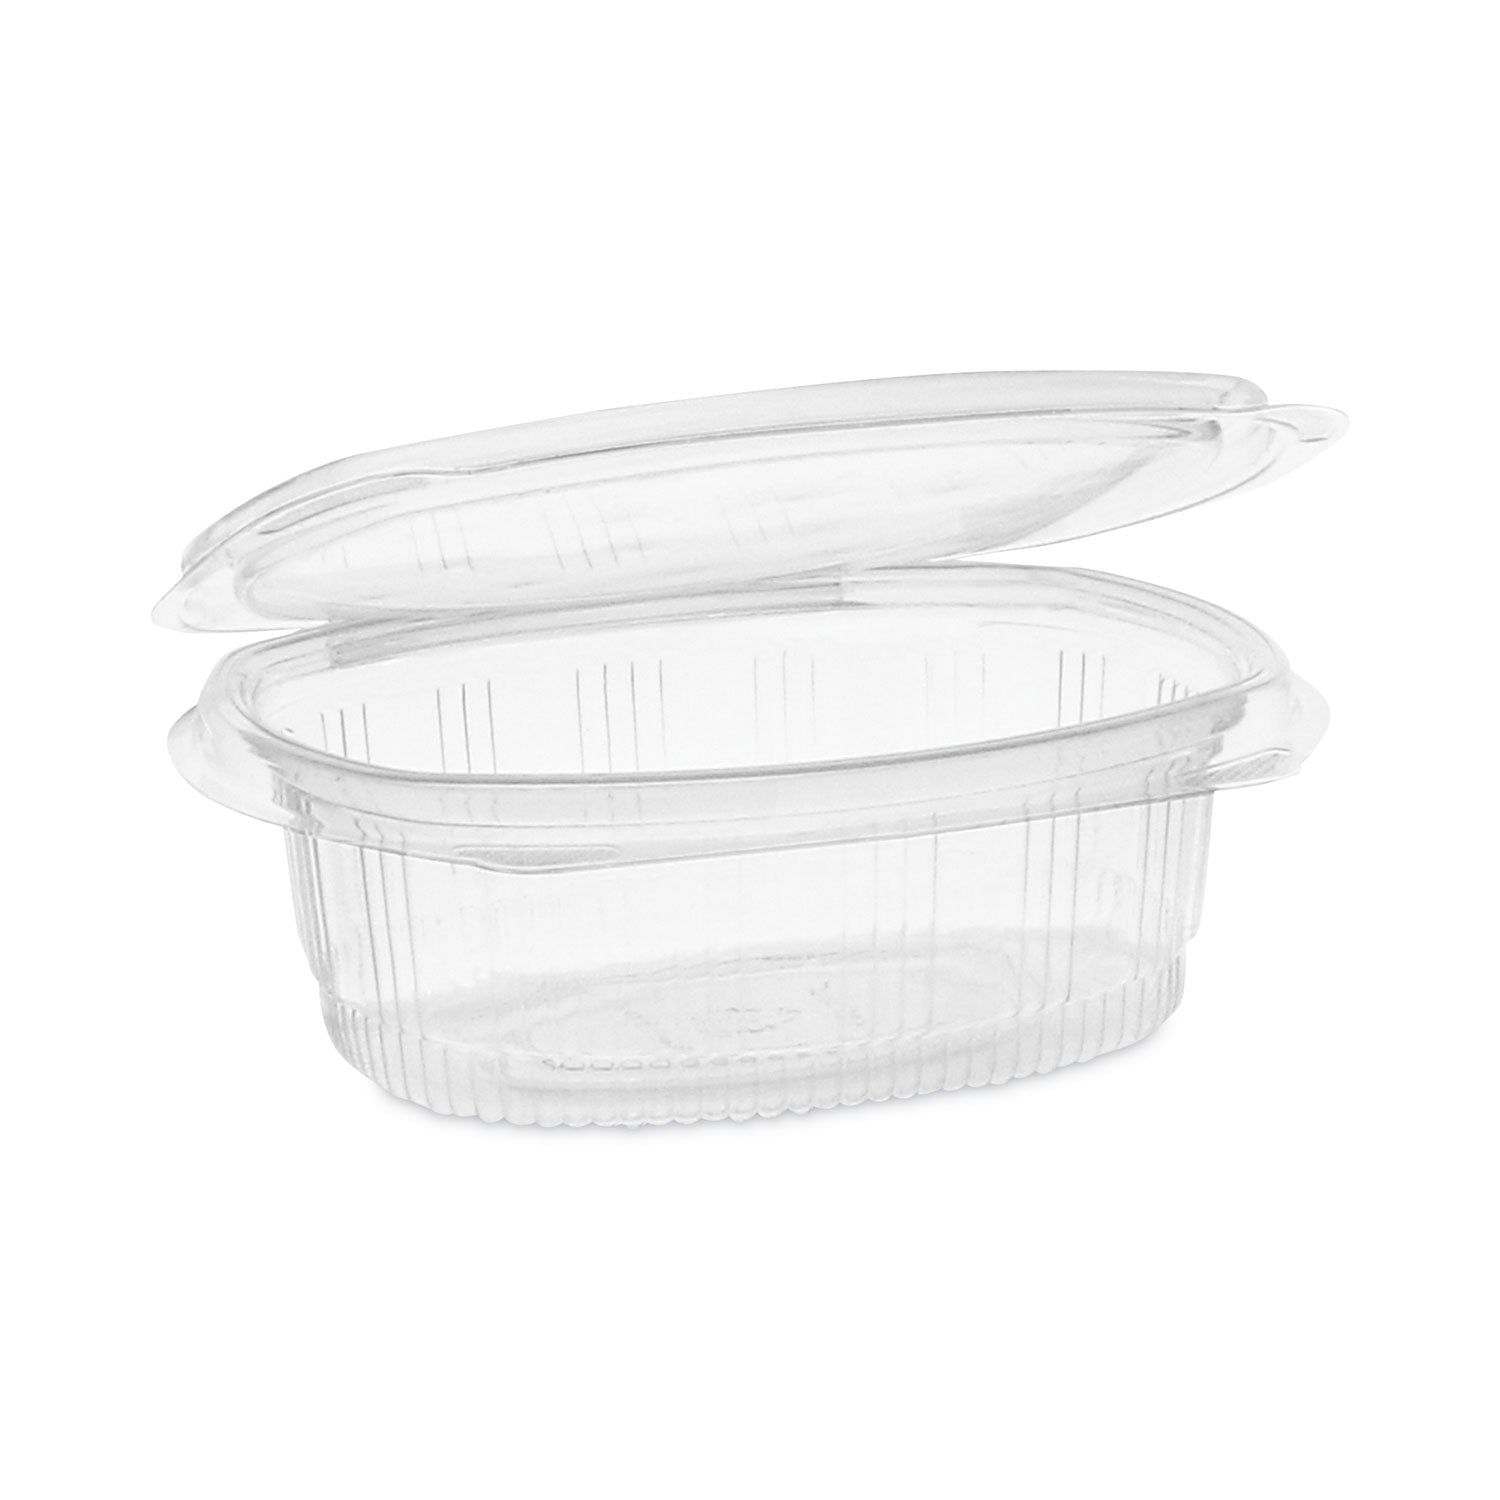 earthchoice-recycled-pet-hinged-container-16-oz-492-x-587-x-248-clear-plastic-200-carton_pct0ca910160000 - 1